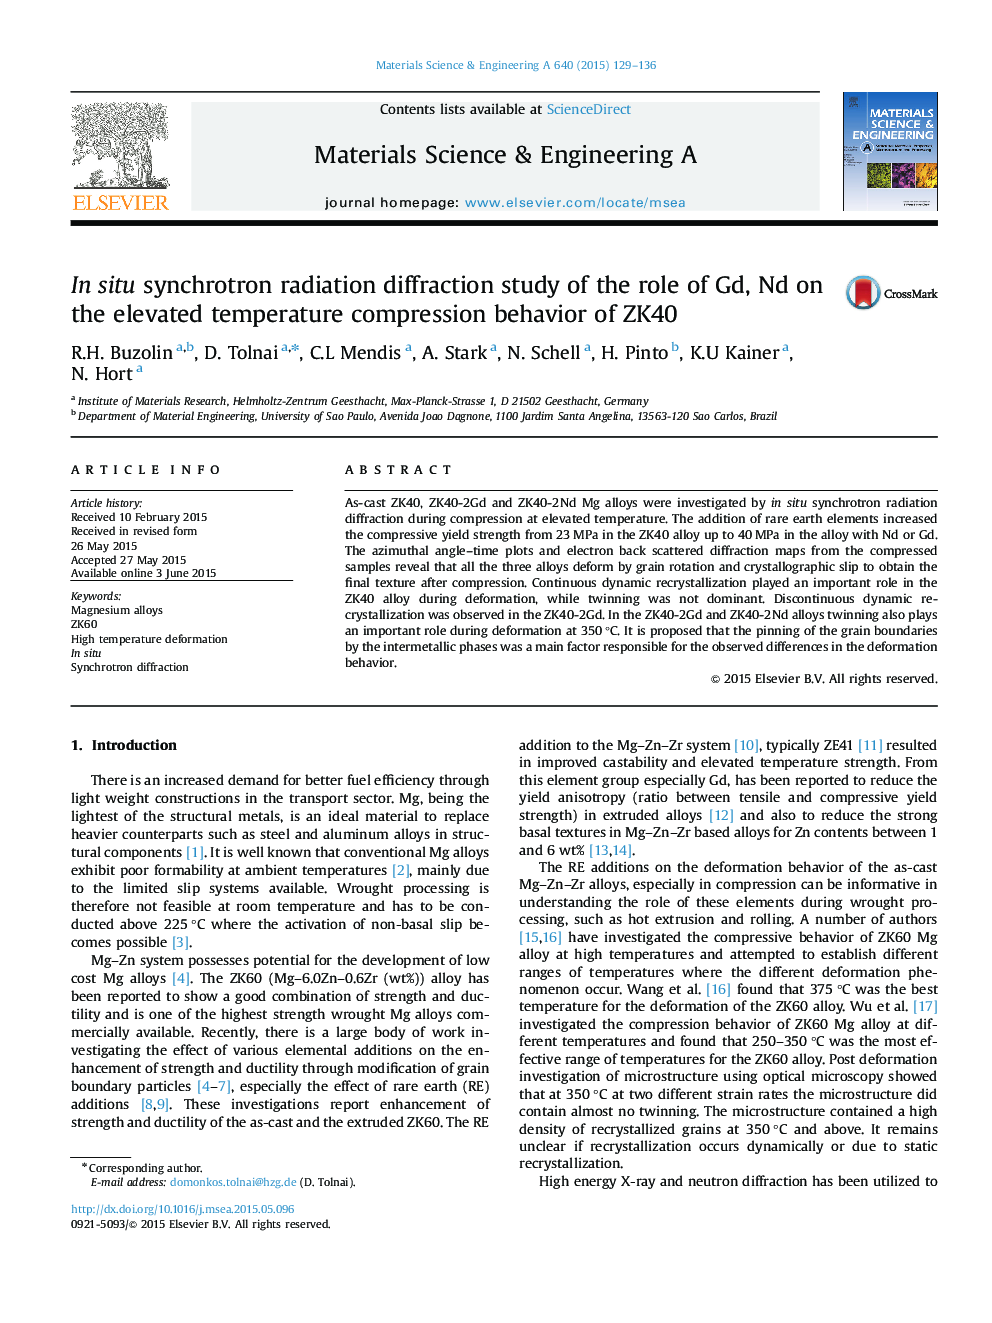 In situ synchrotron radiation diffraction study of the role of Gd, Nd on the elevated temperature compression behavior of ZK40